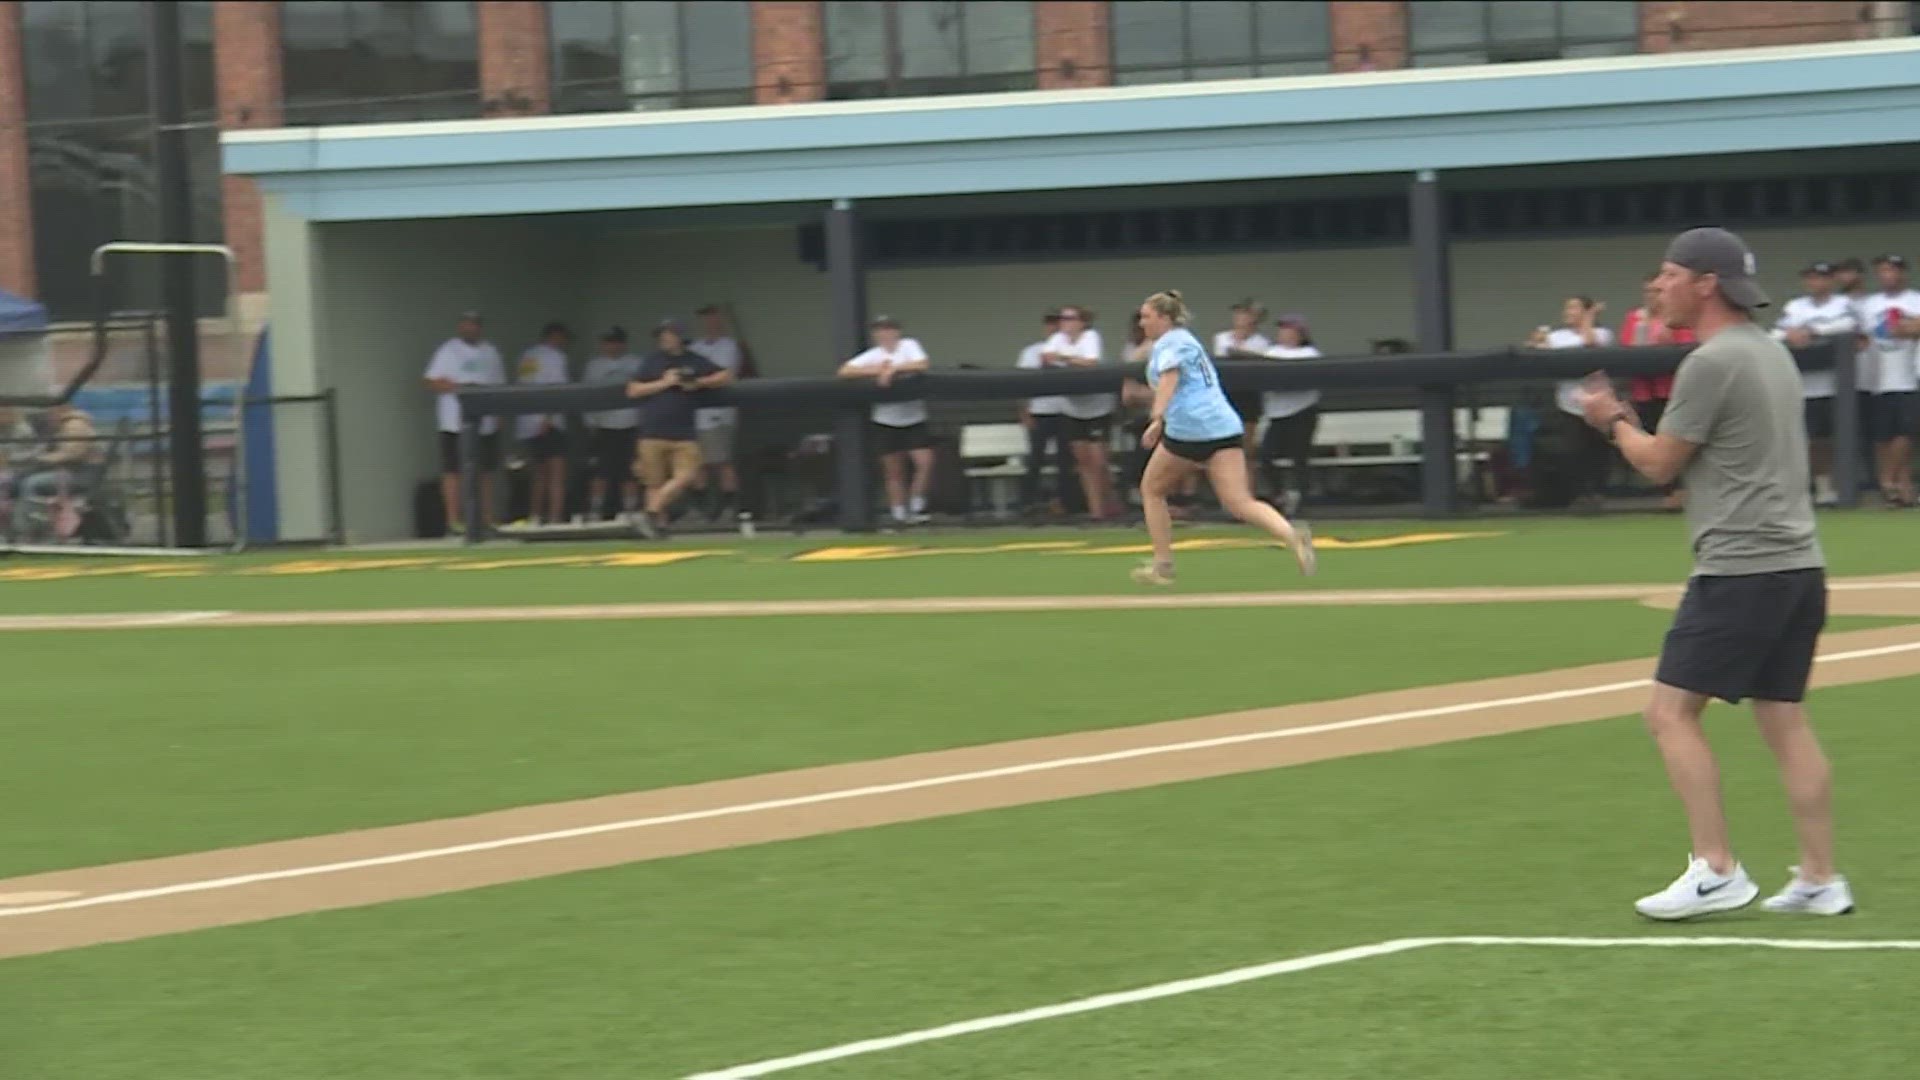 Buffalo police and fire departments squared off in a charity softball match